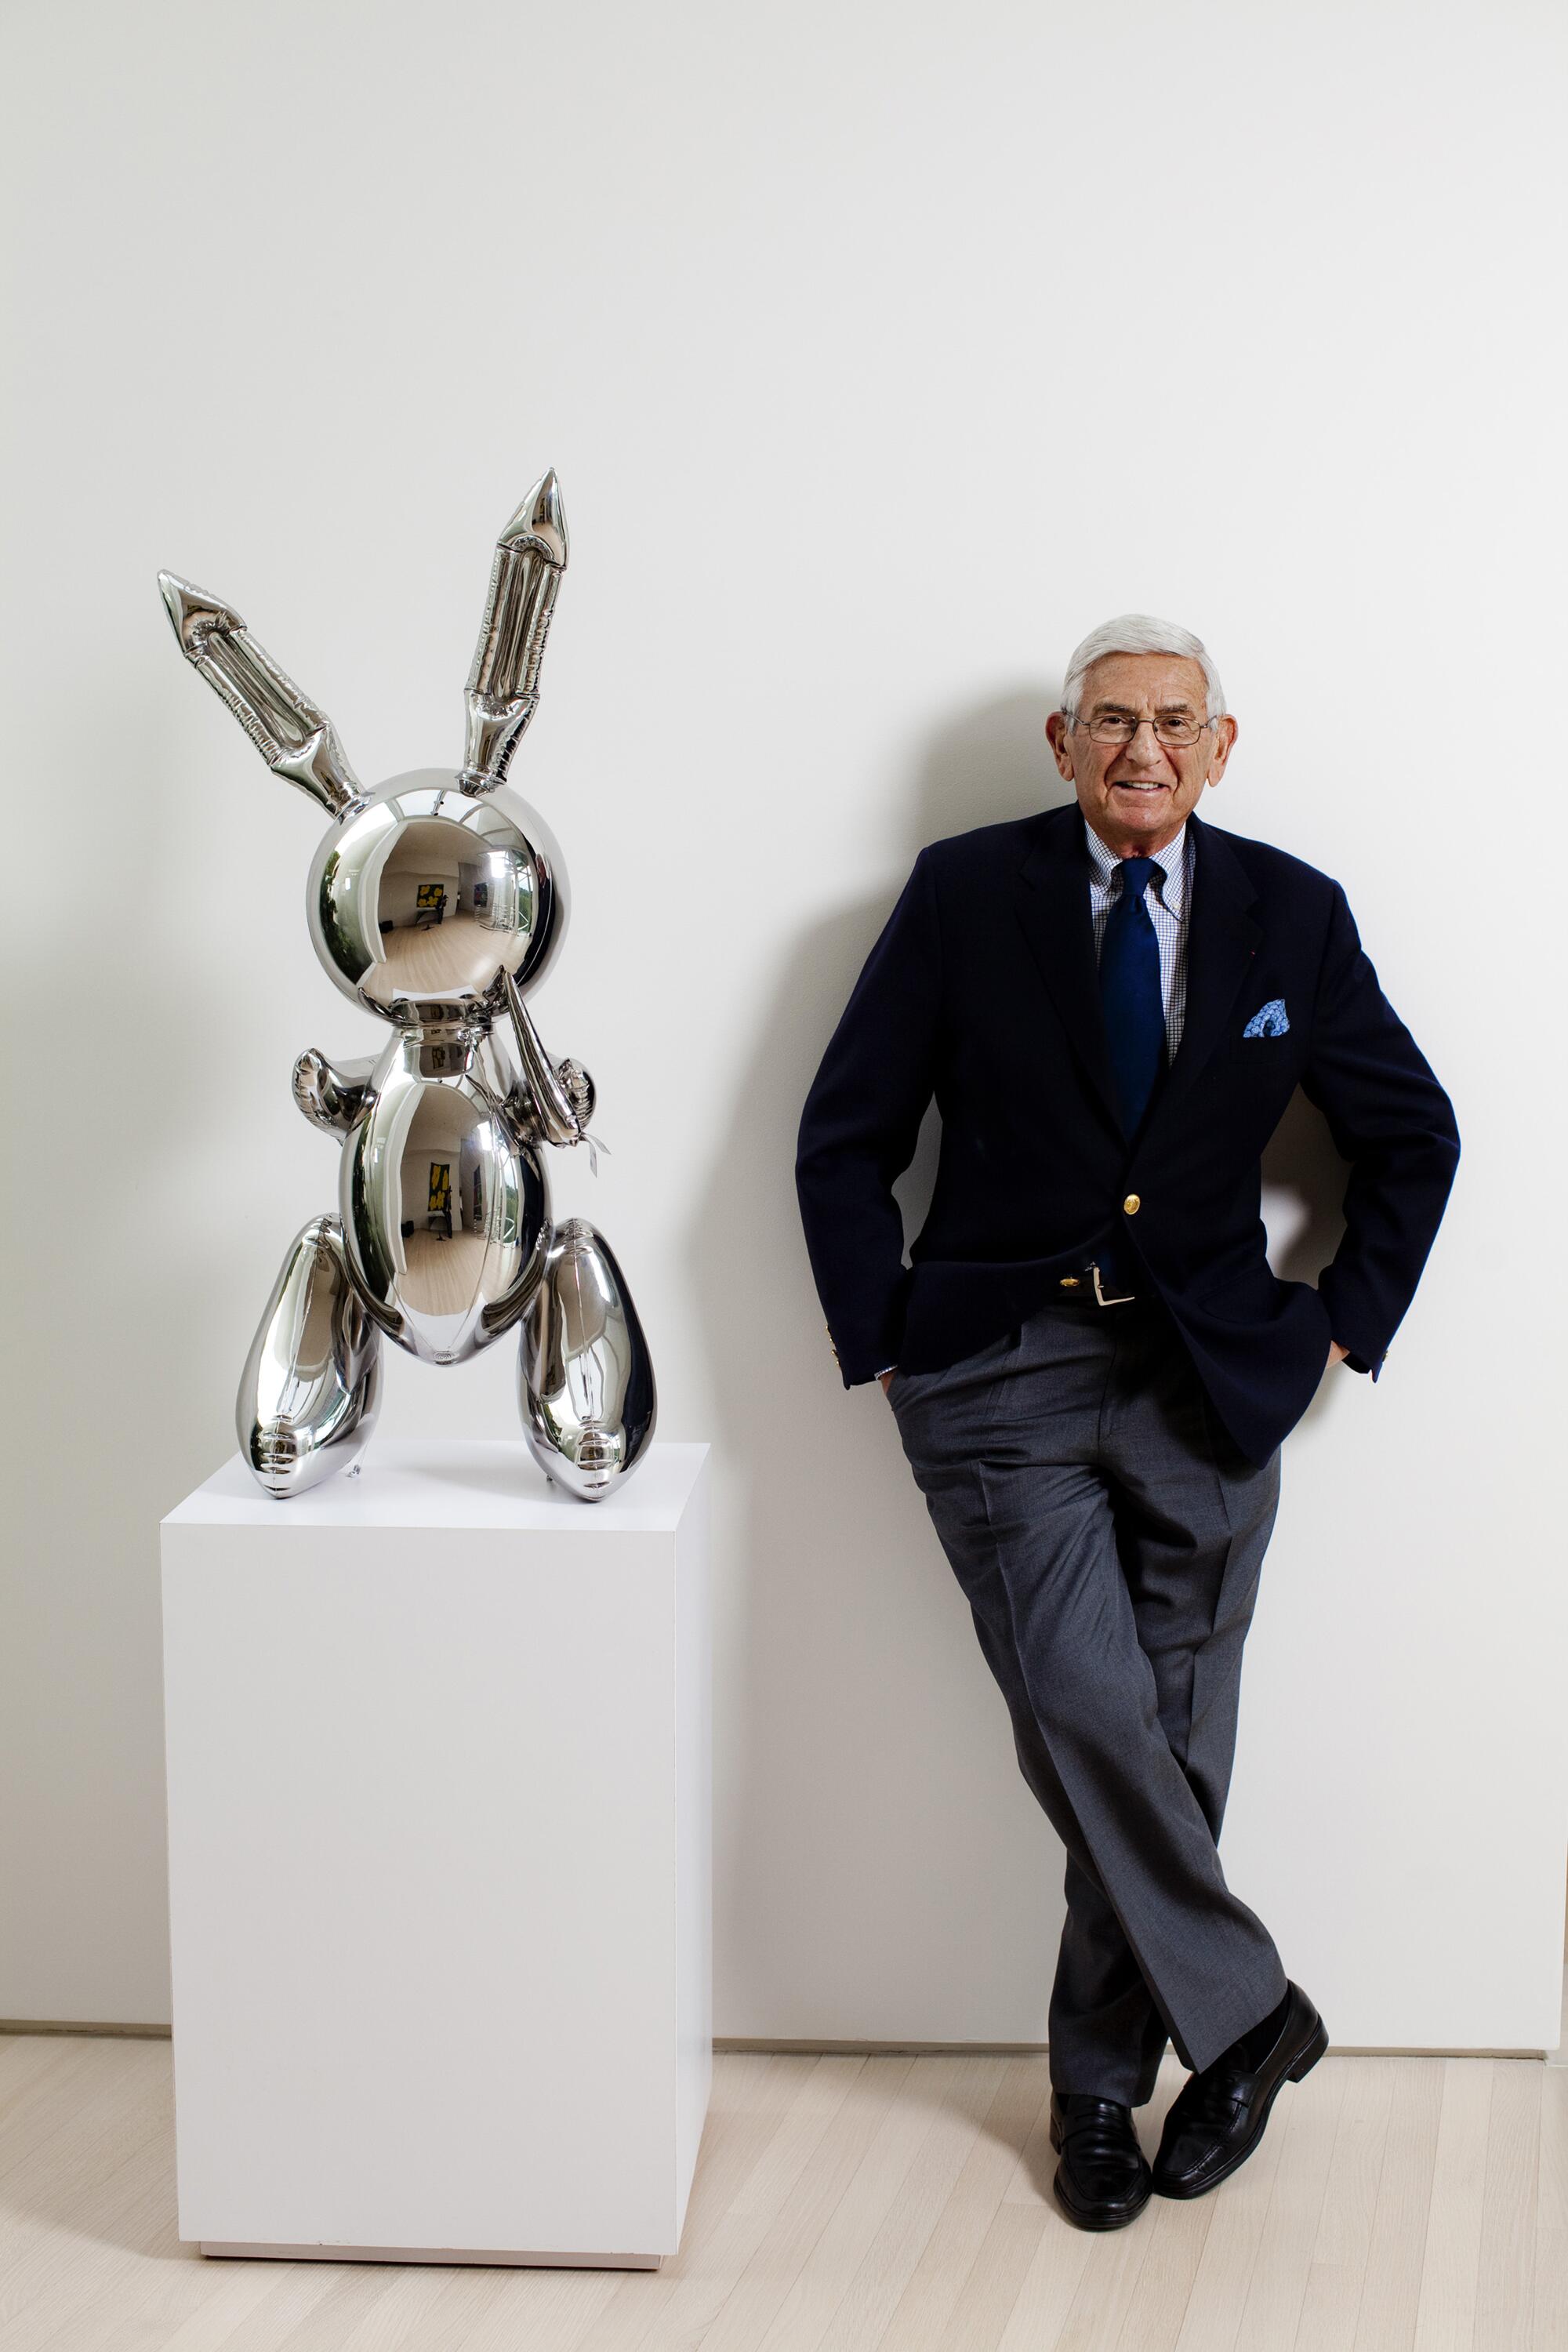 Eli Broad, hands in pockets, leans against a white wall next to a gray metal sculpture on a pedestal.